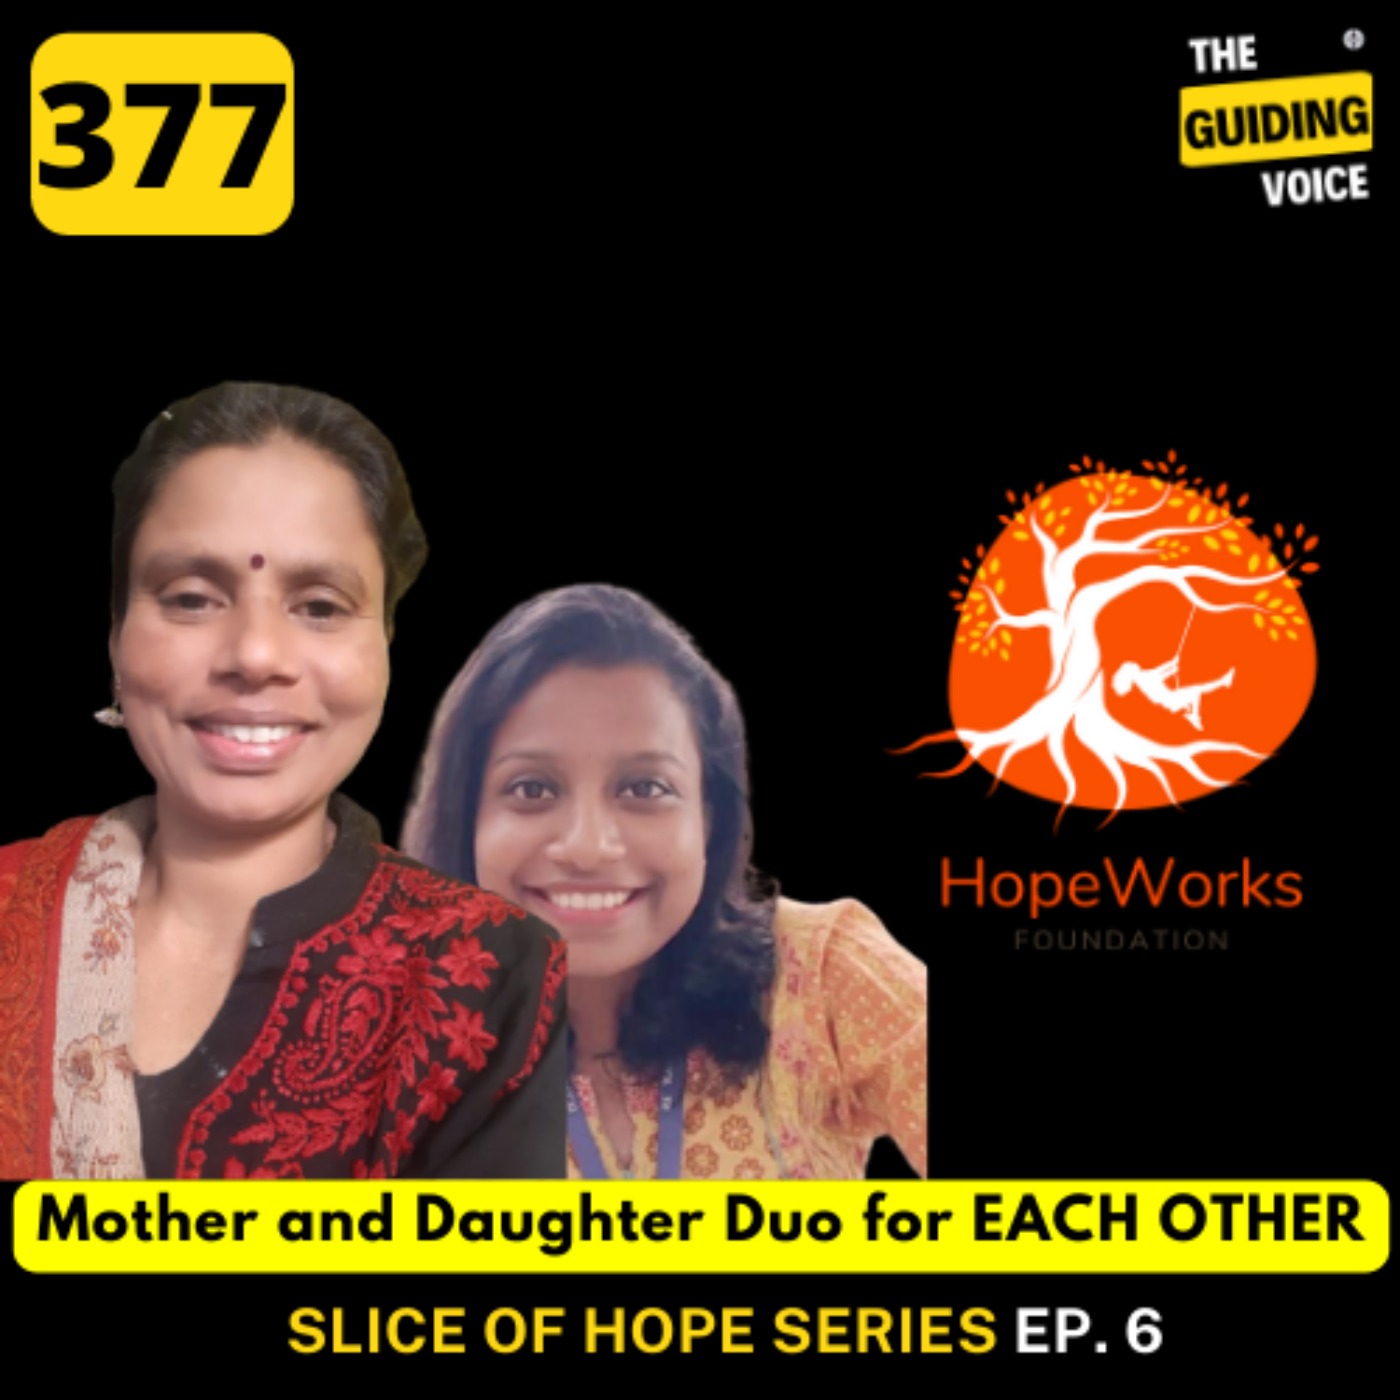 The Mother-Daughter duo for each other | EP 6 Of Slice of Hope Series Vasantha & Amulya | #TGV377